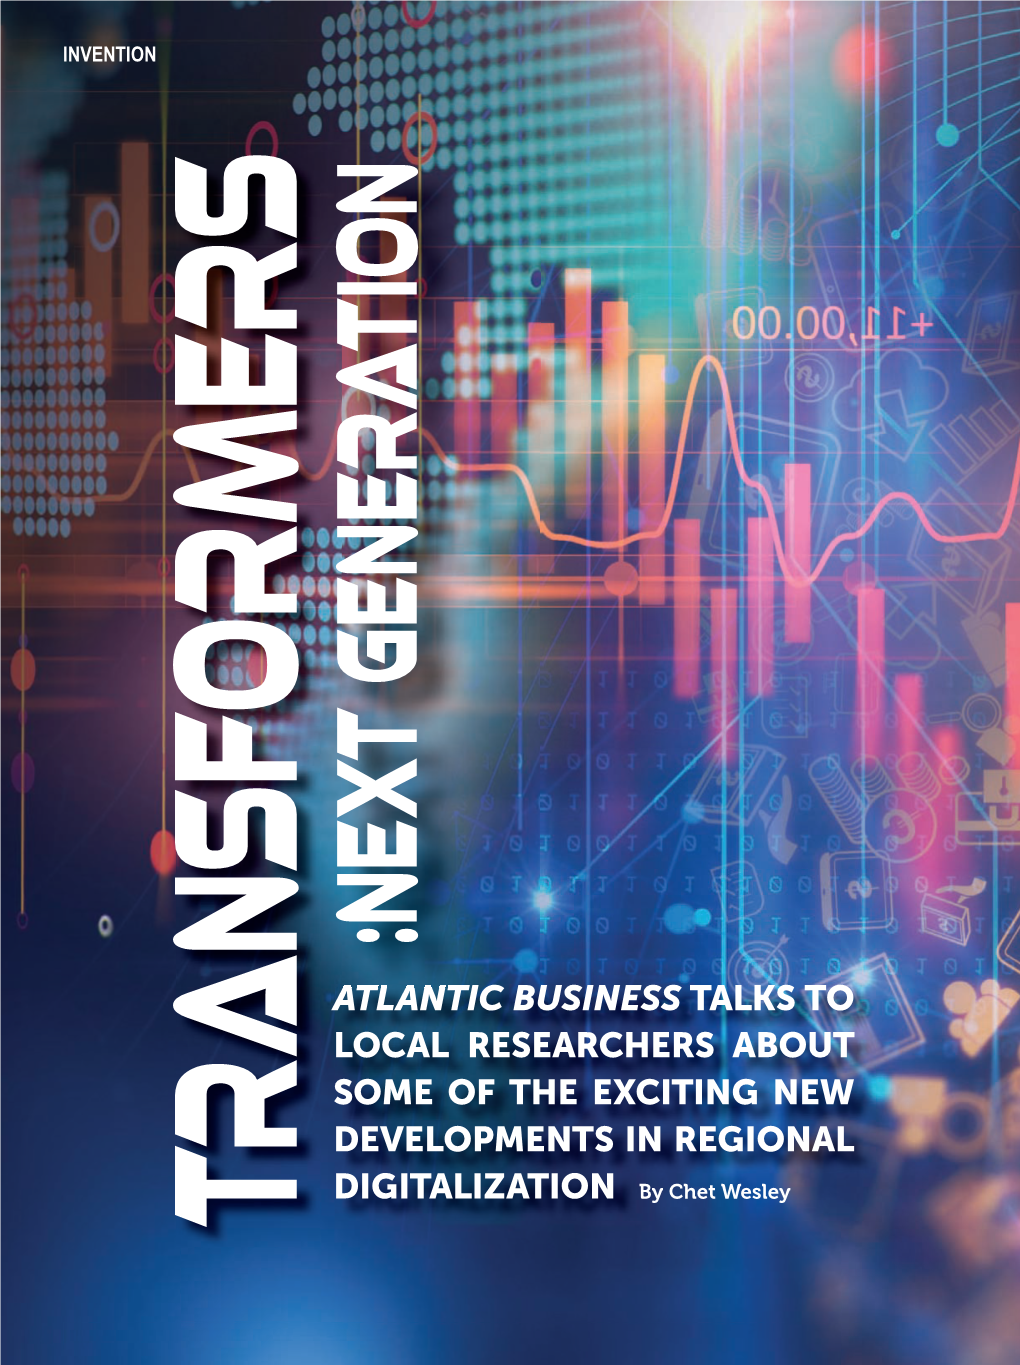 Atlantic Business Talks to Local Researchers About Some of the Exciting New Developments in Regional Digitalization